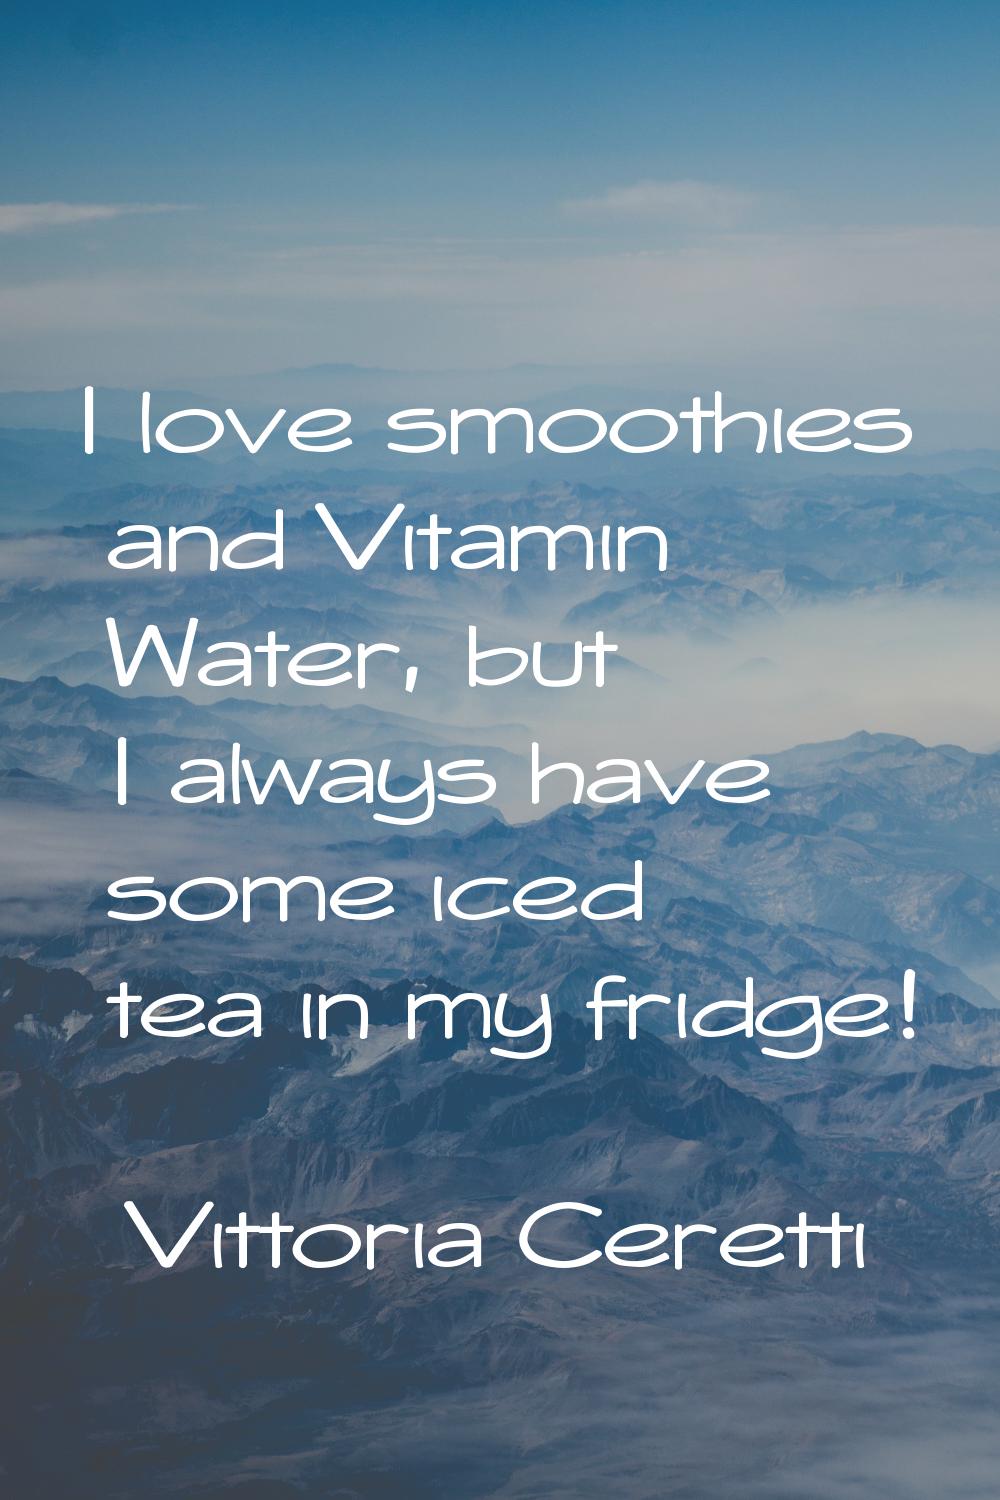 I love smoothies and Vitamin Water, but I always have some iced tea in my fridge!